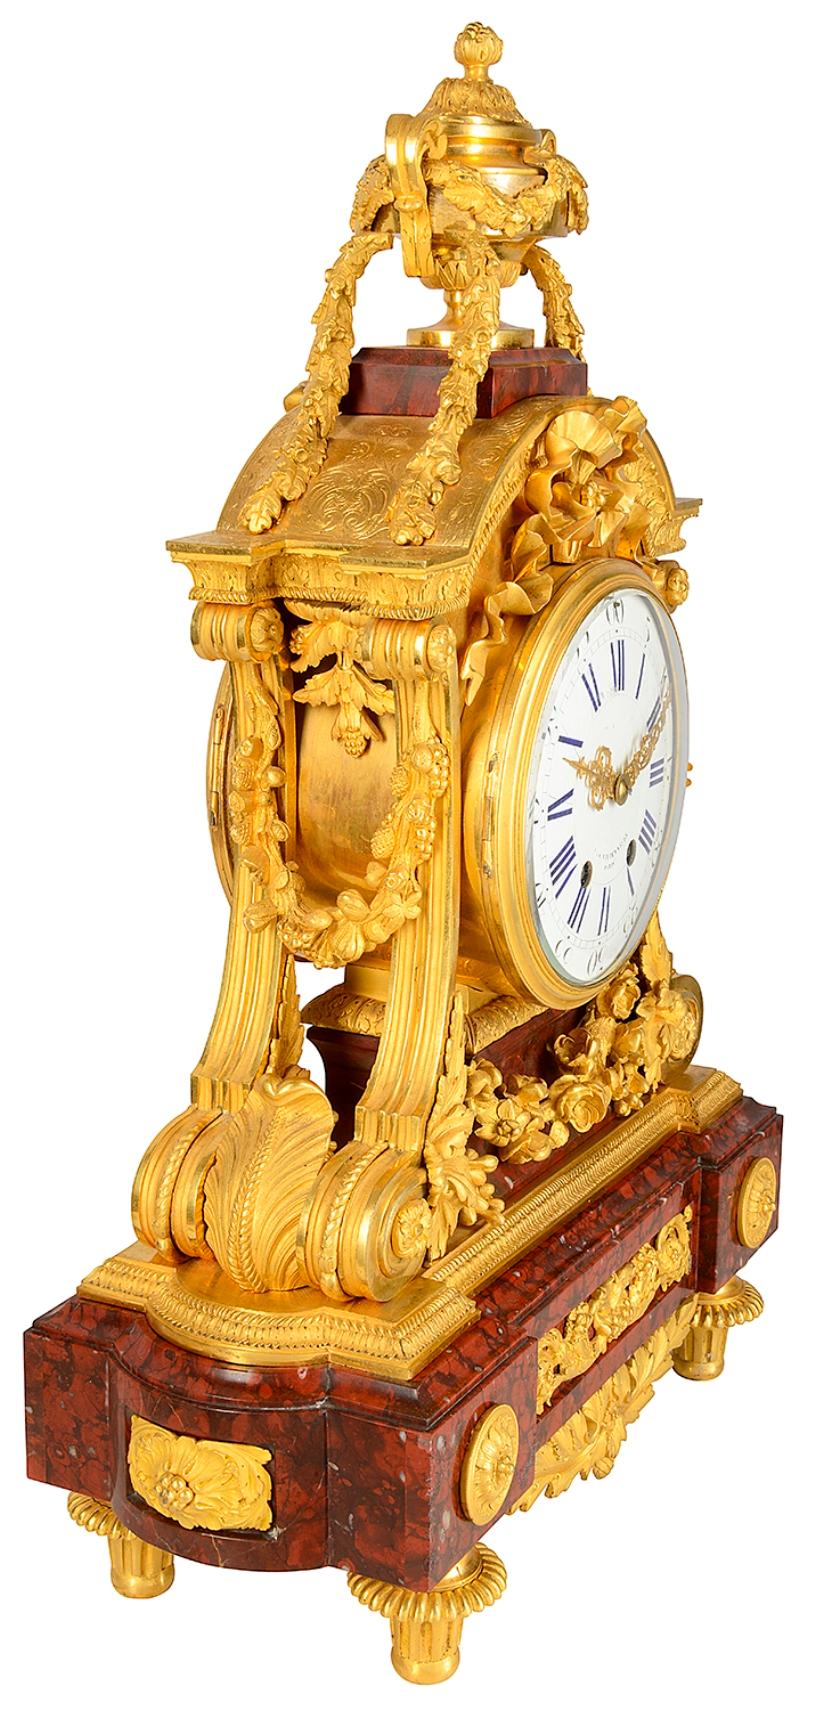 A fine quality 19th century French gilded ormolu and Breccia marble mantel clock, having a two handled lidded urn finial, foliate swags hanging down to ribbon decoration above the white enamel clock with Roman numerals, that has an eight day